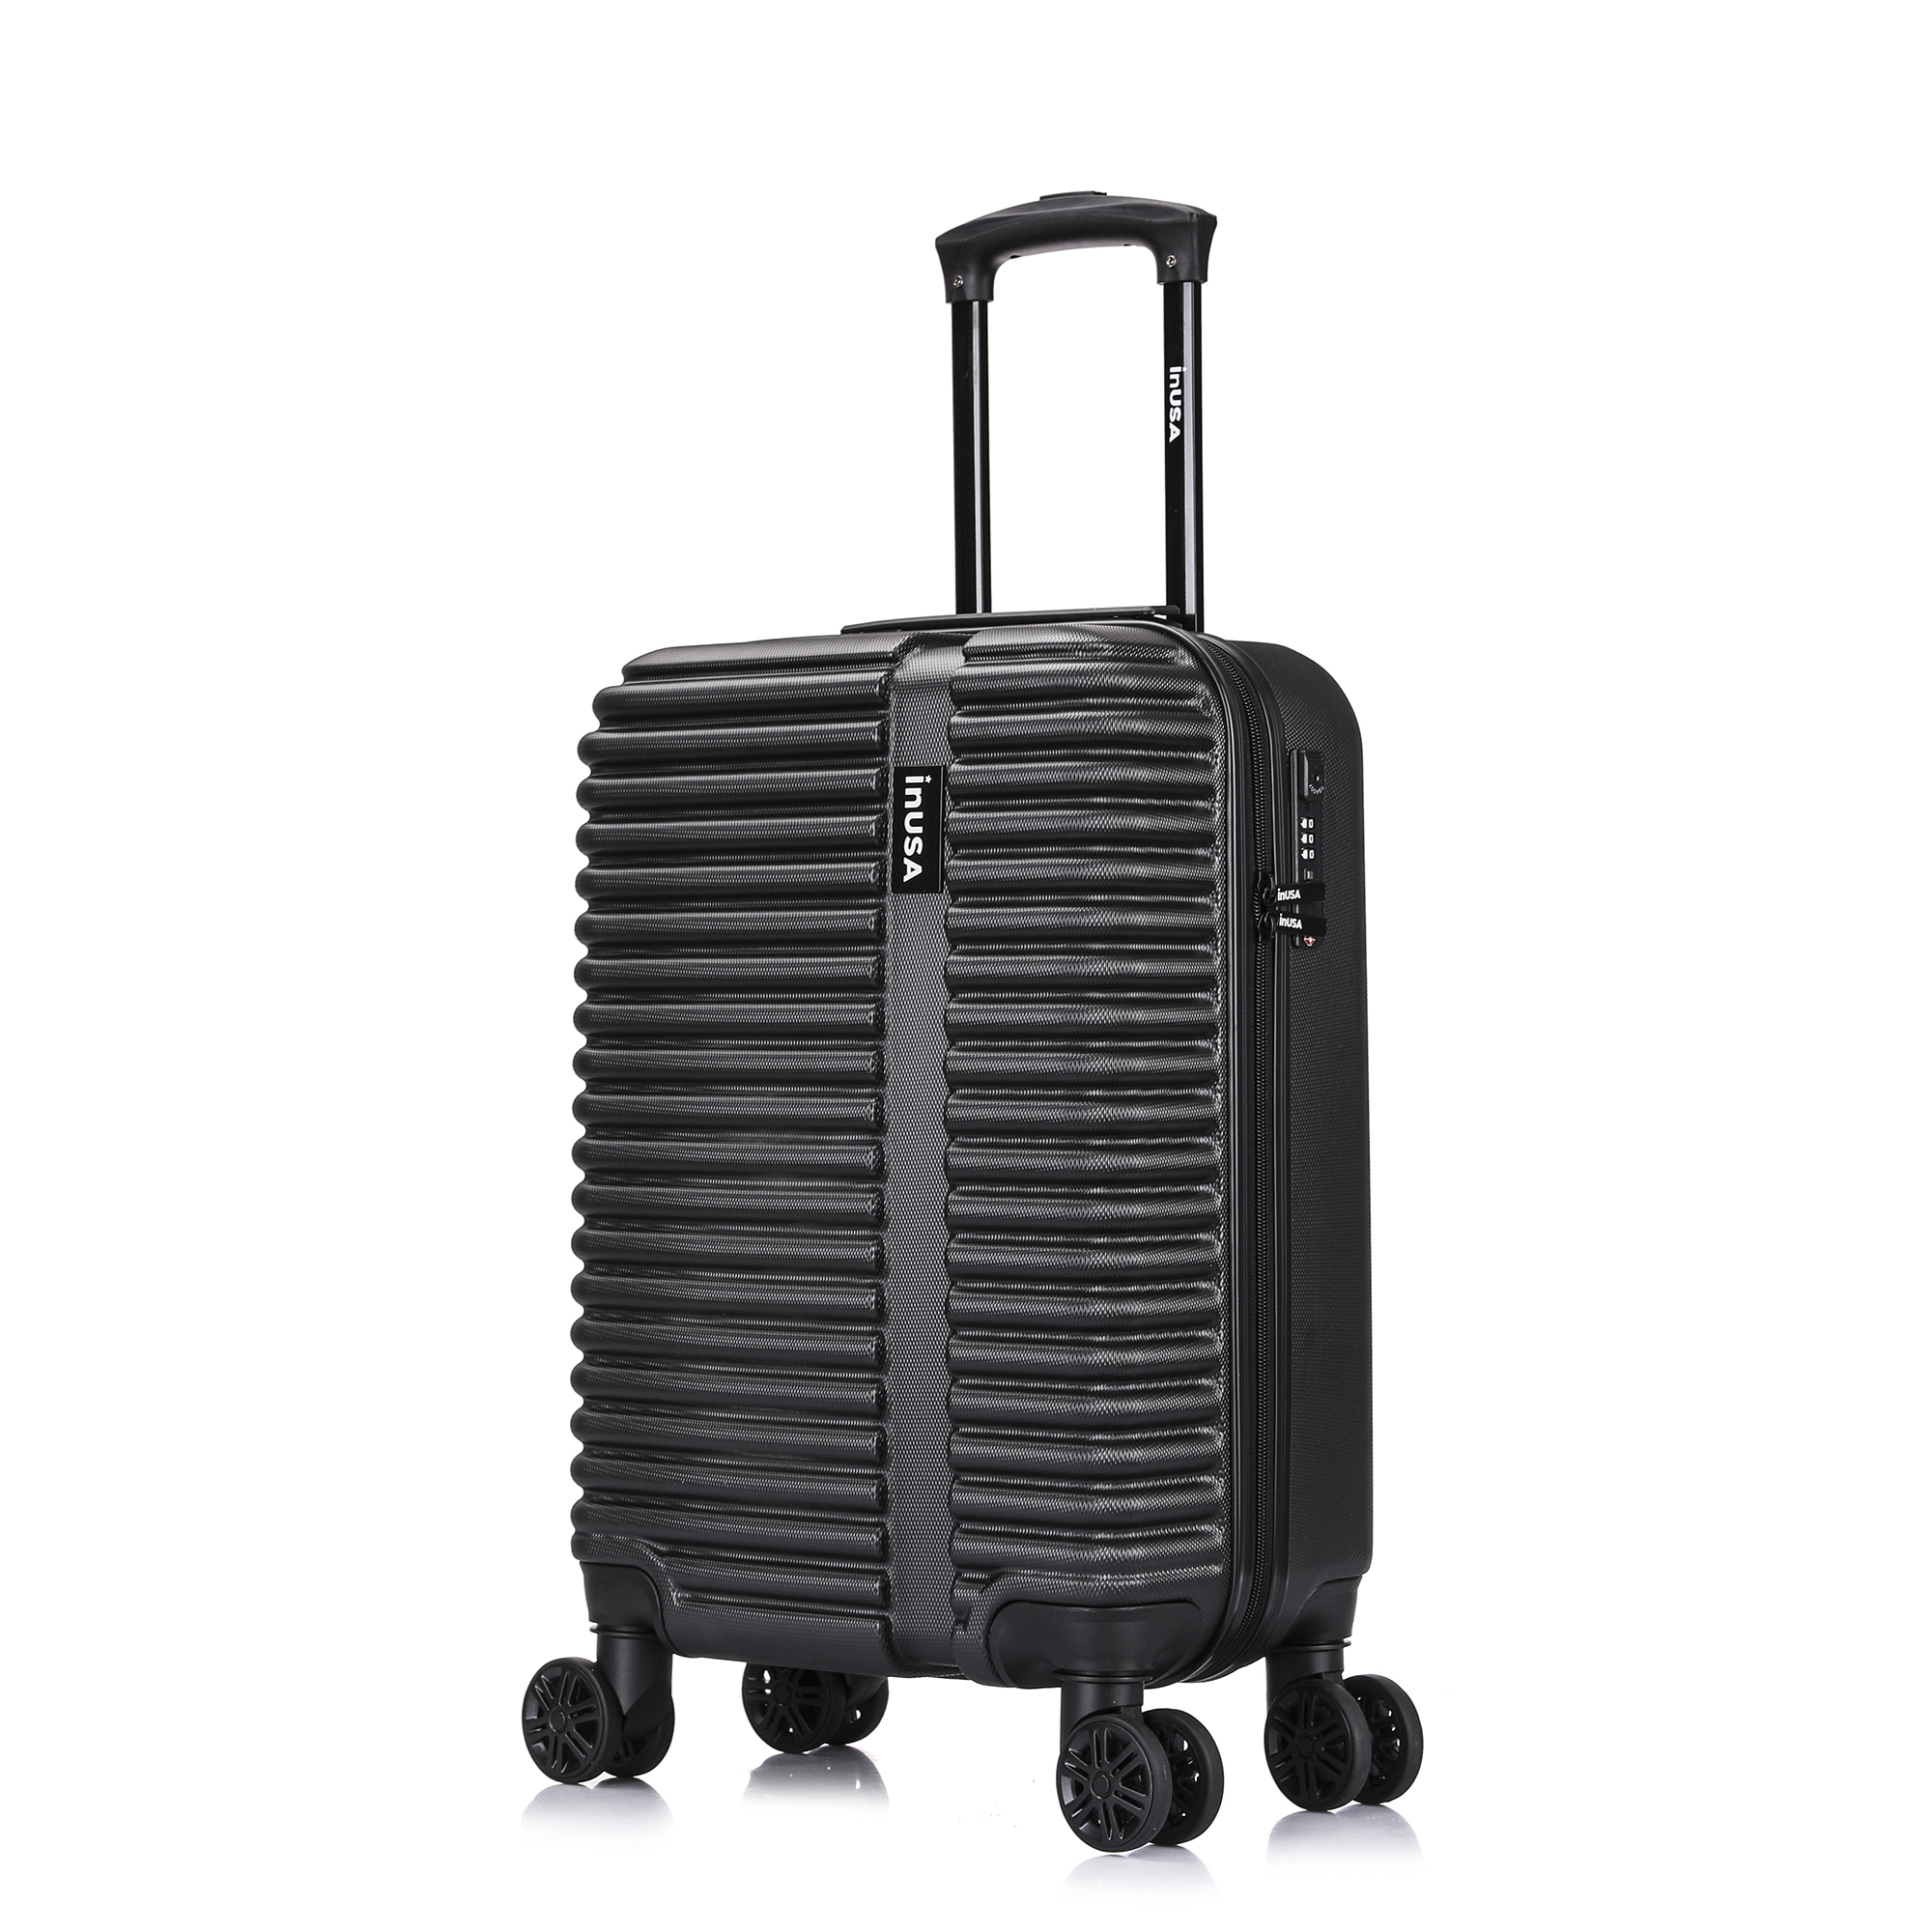 InUSA Ally 20" Hardside Lightweight Luggage with Spinner Wheels, Handle and Trolley, Black - image 1 of 13